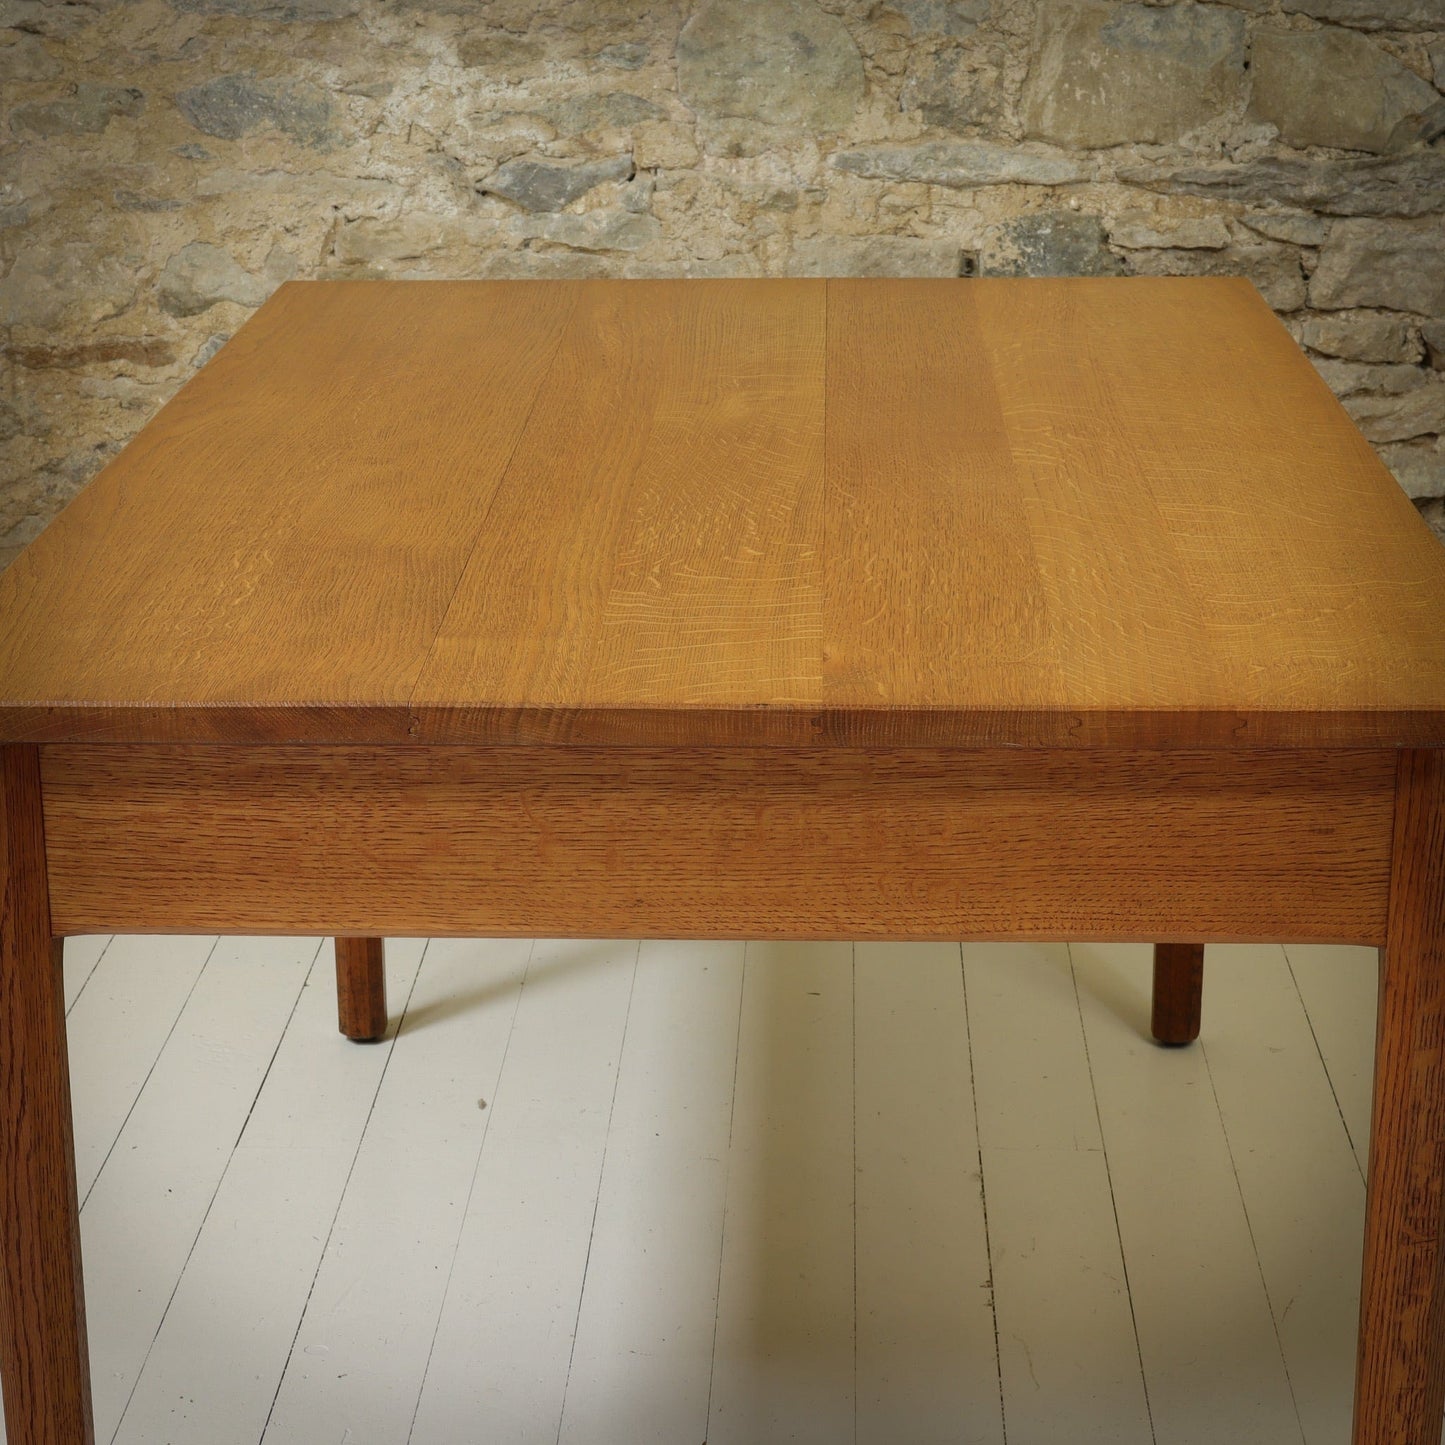 Gordon Russell Arts & Crafts Cotswold School English Oak Dining Table 1961